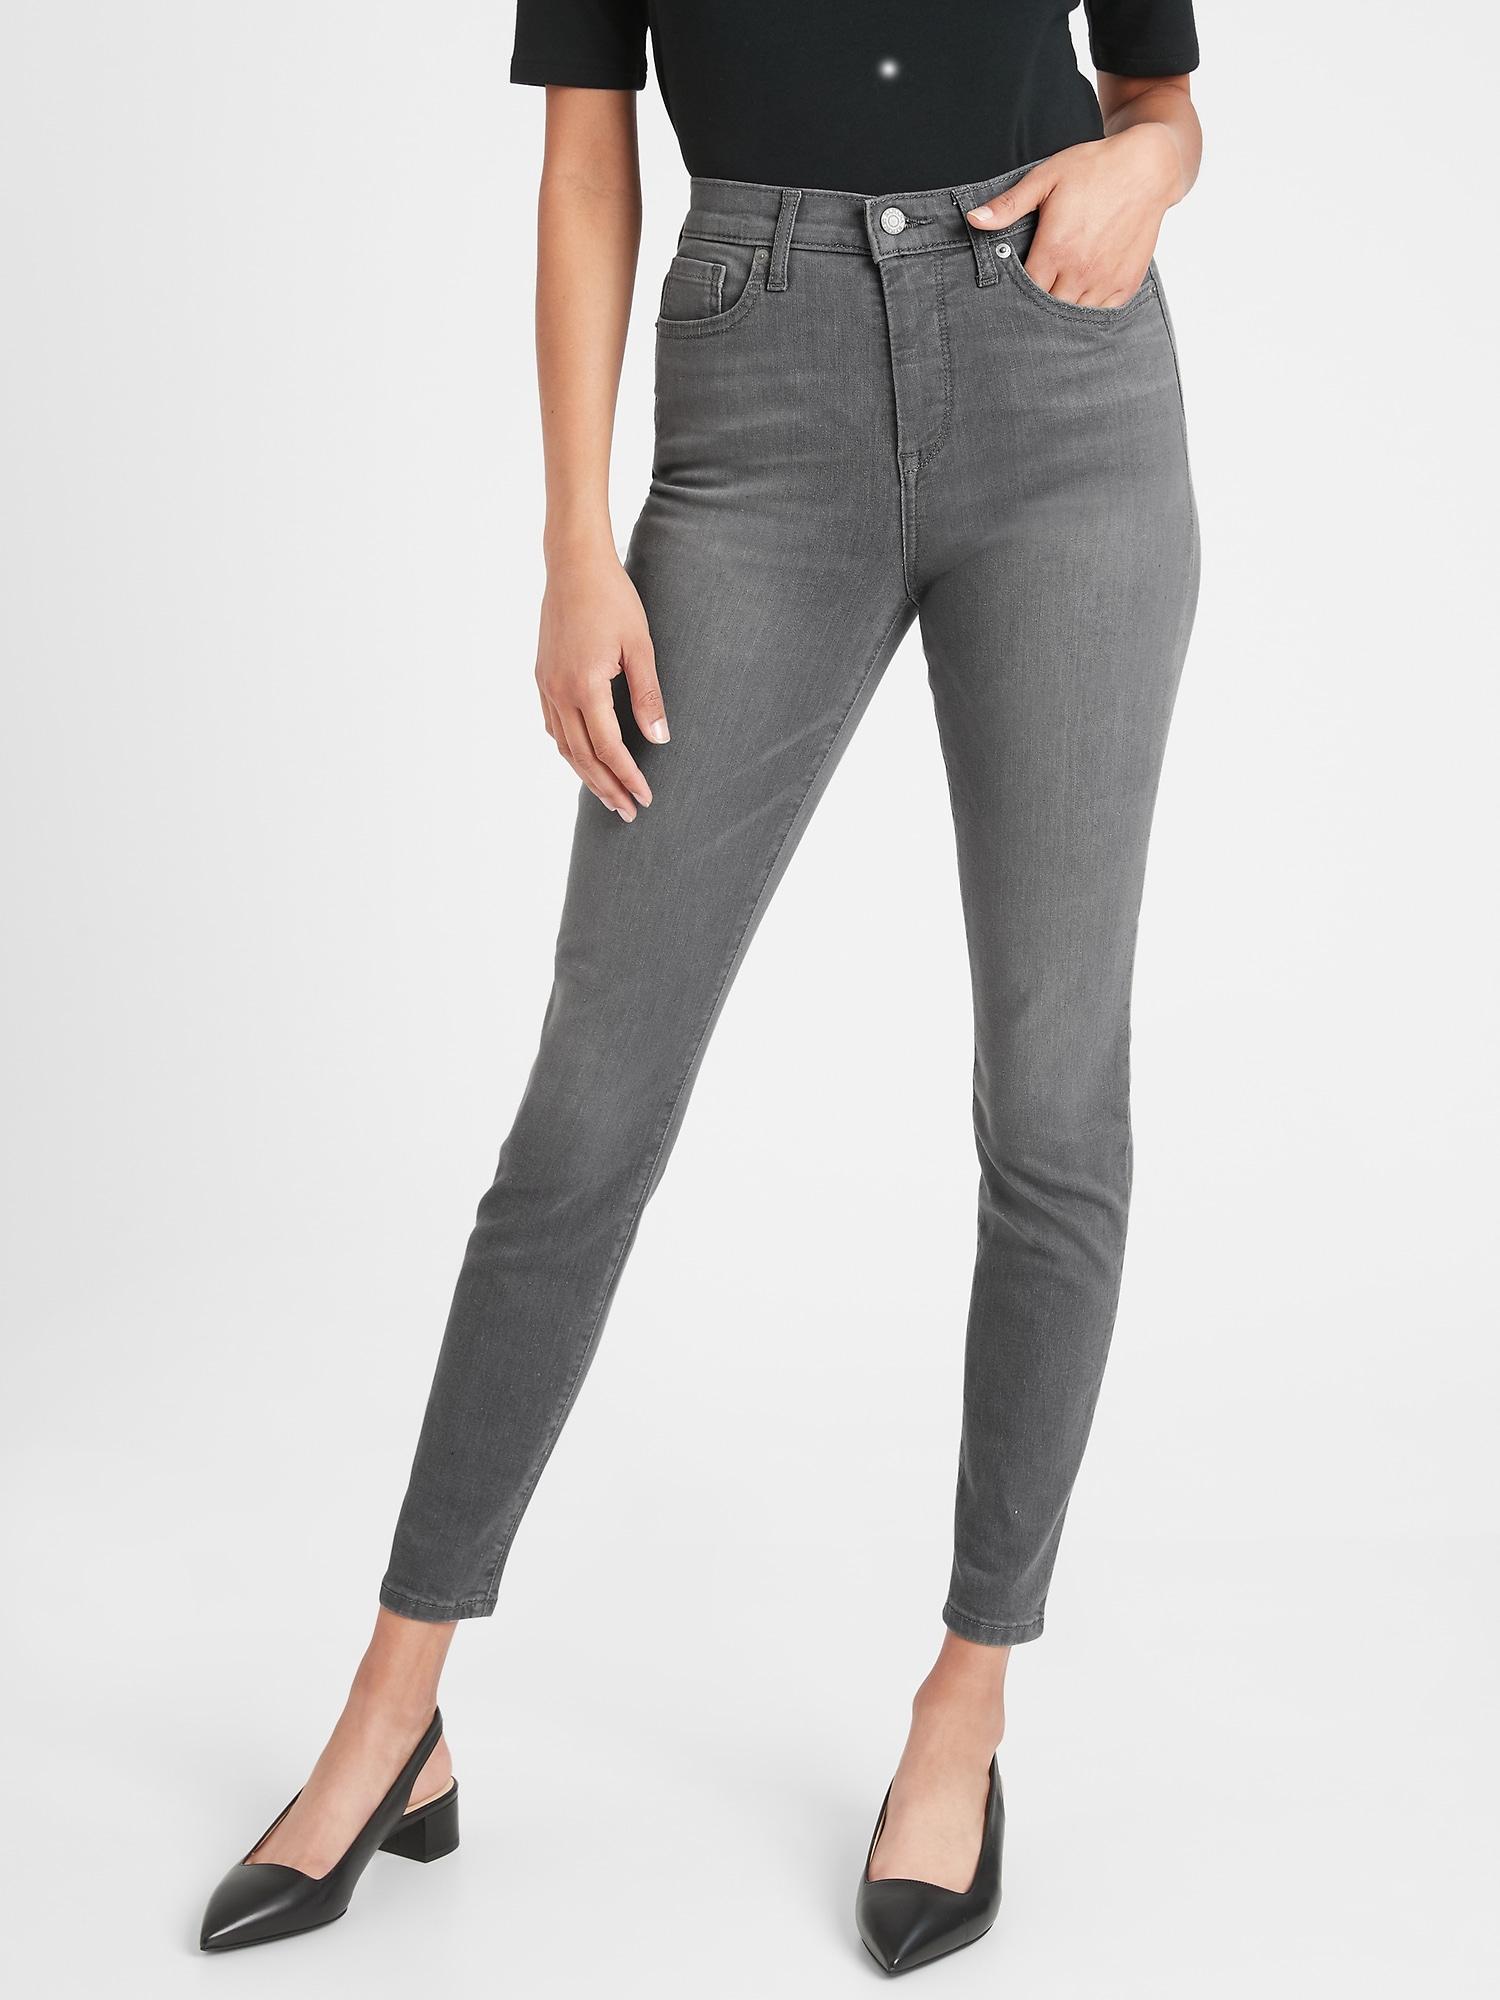 Banana Republic Factory Petite High-rise Washed-out Grey Skinny Jean in  Gray - Lyst